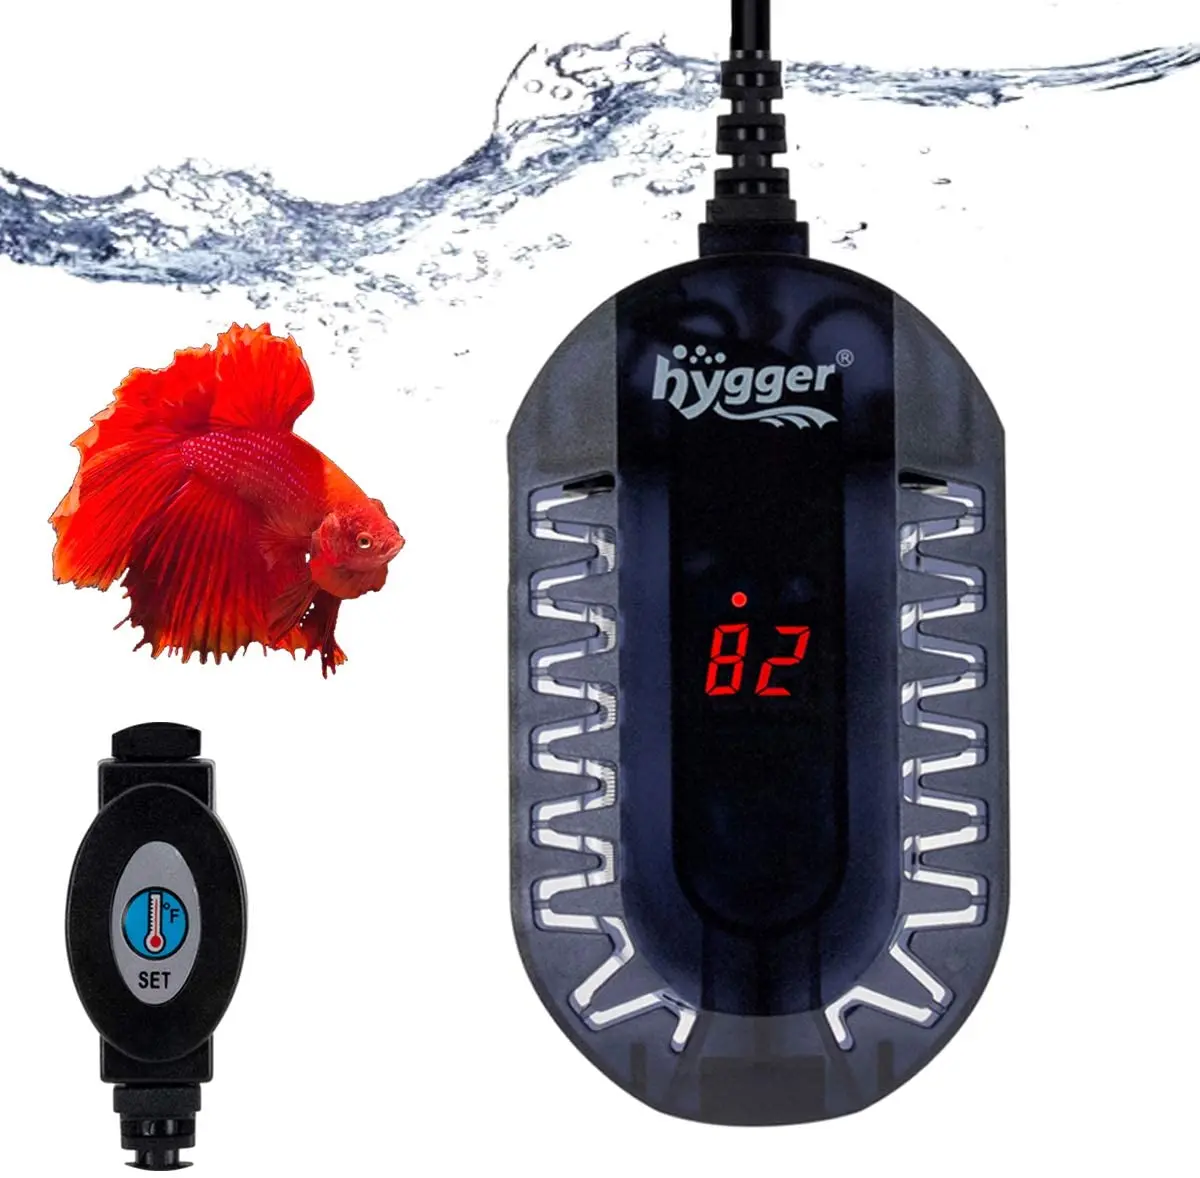 

Hygger Aquarium Heater Submersible Fish Tank Heaters with LED Temperature Display and External Temperature Controller